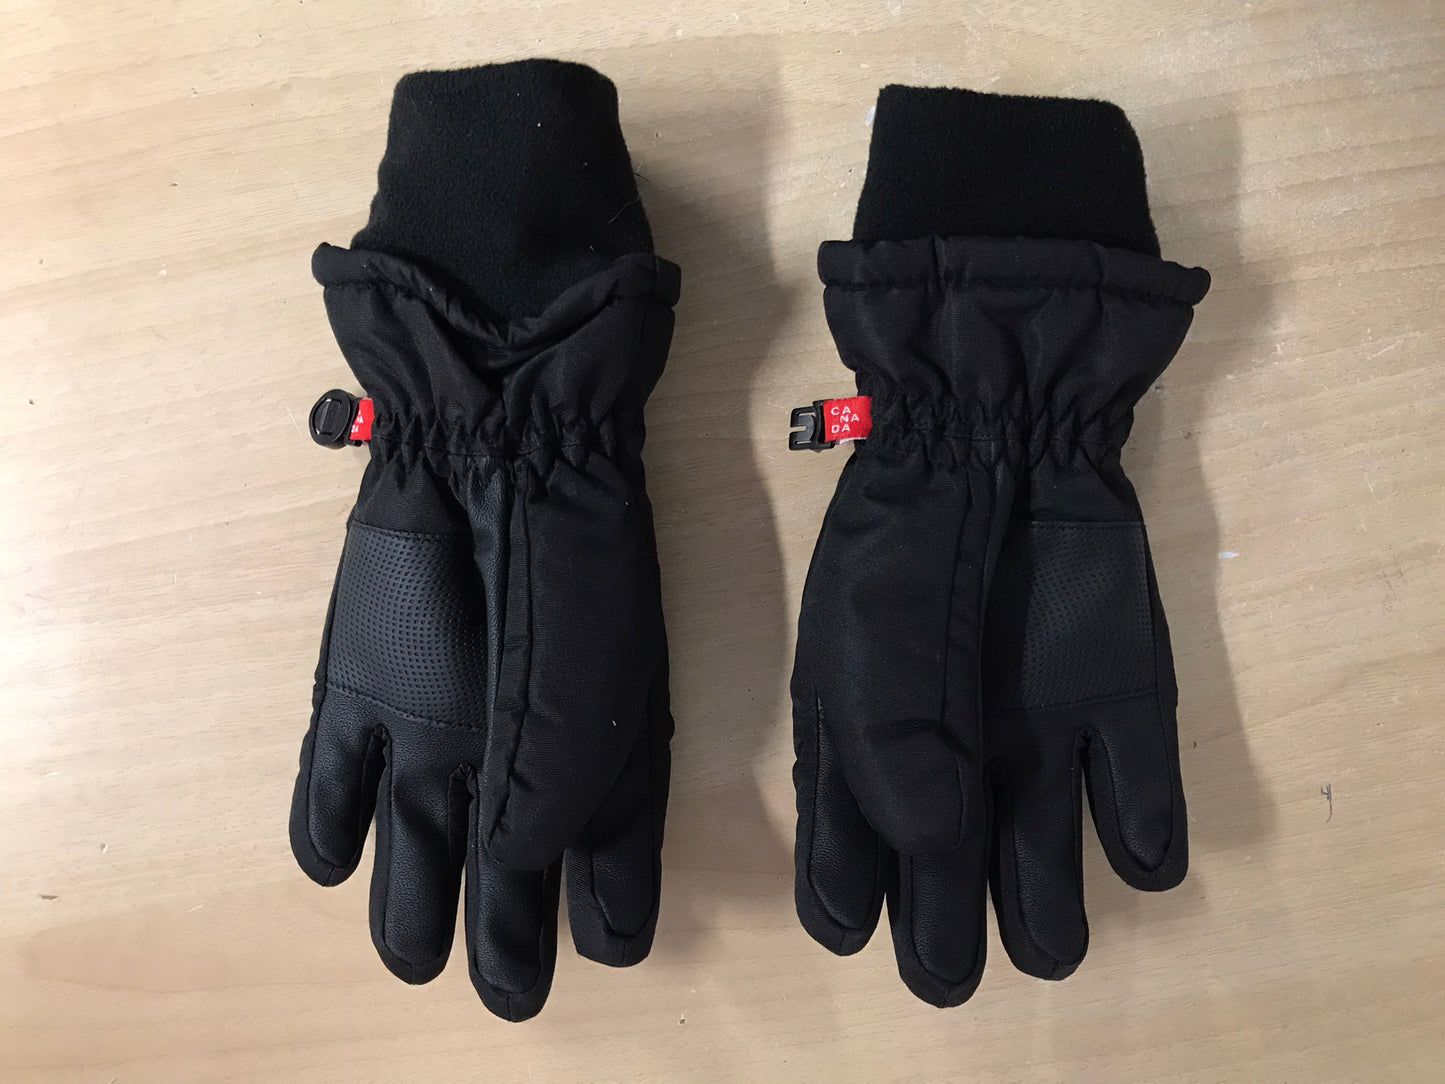 Winter Gloves and Mitts Child Size 7-9 Kombi Black As New